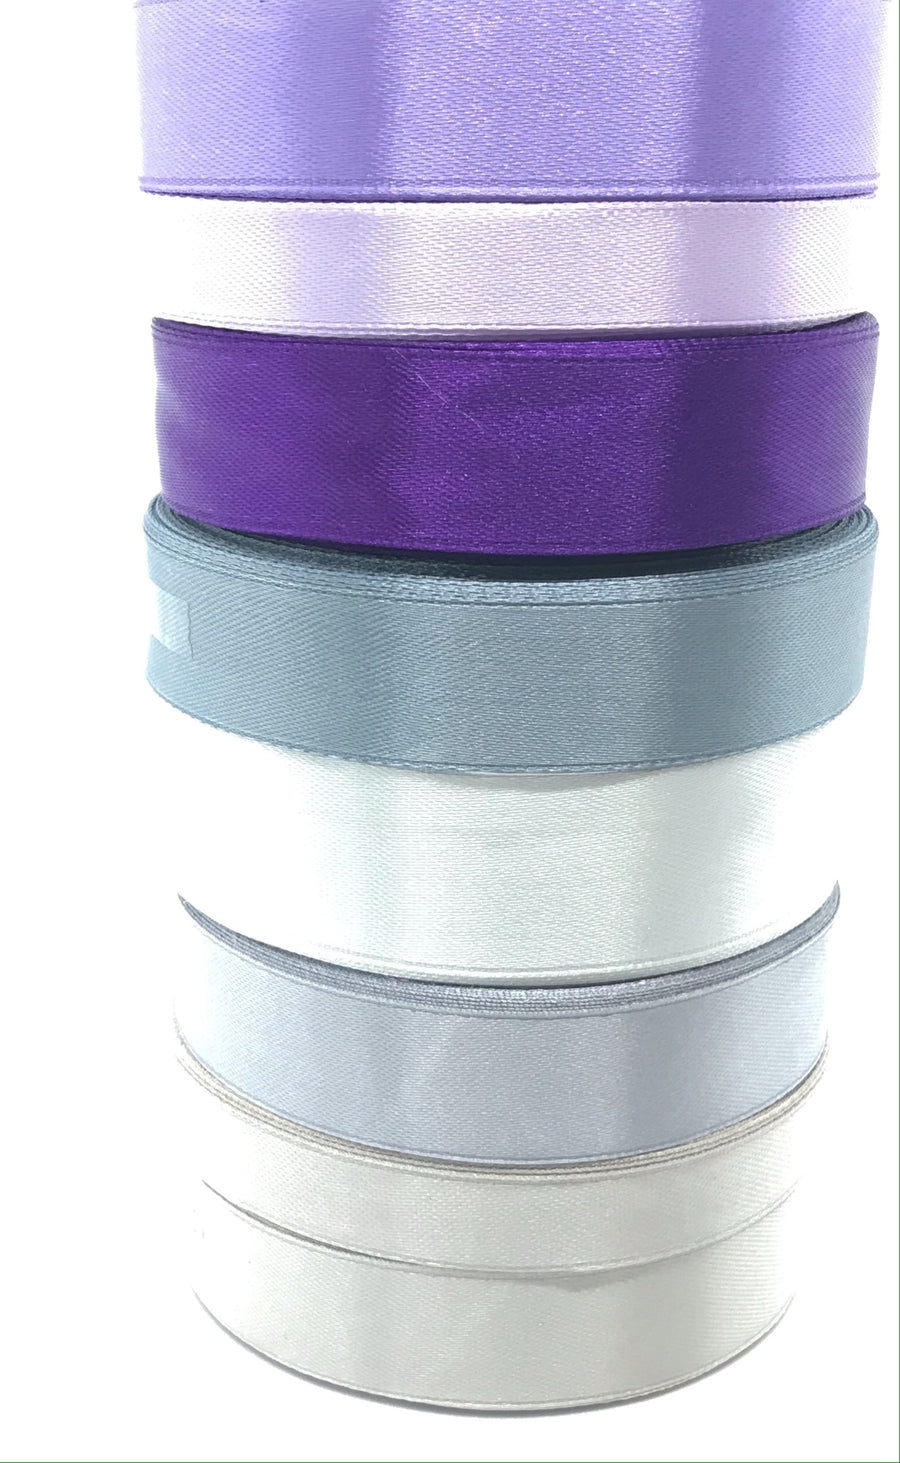 stack of purple to silver singel faced ribbons for crafts